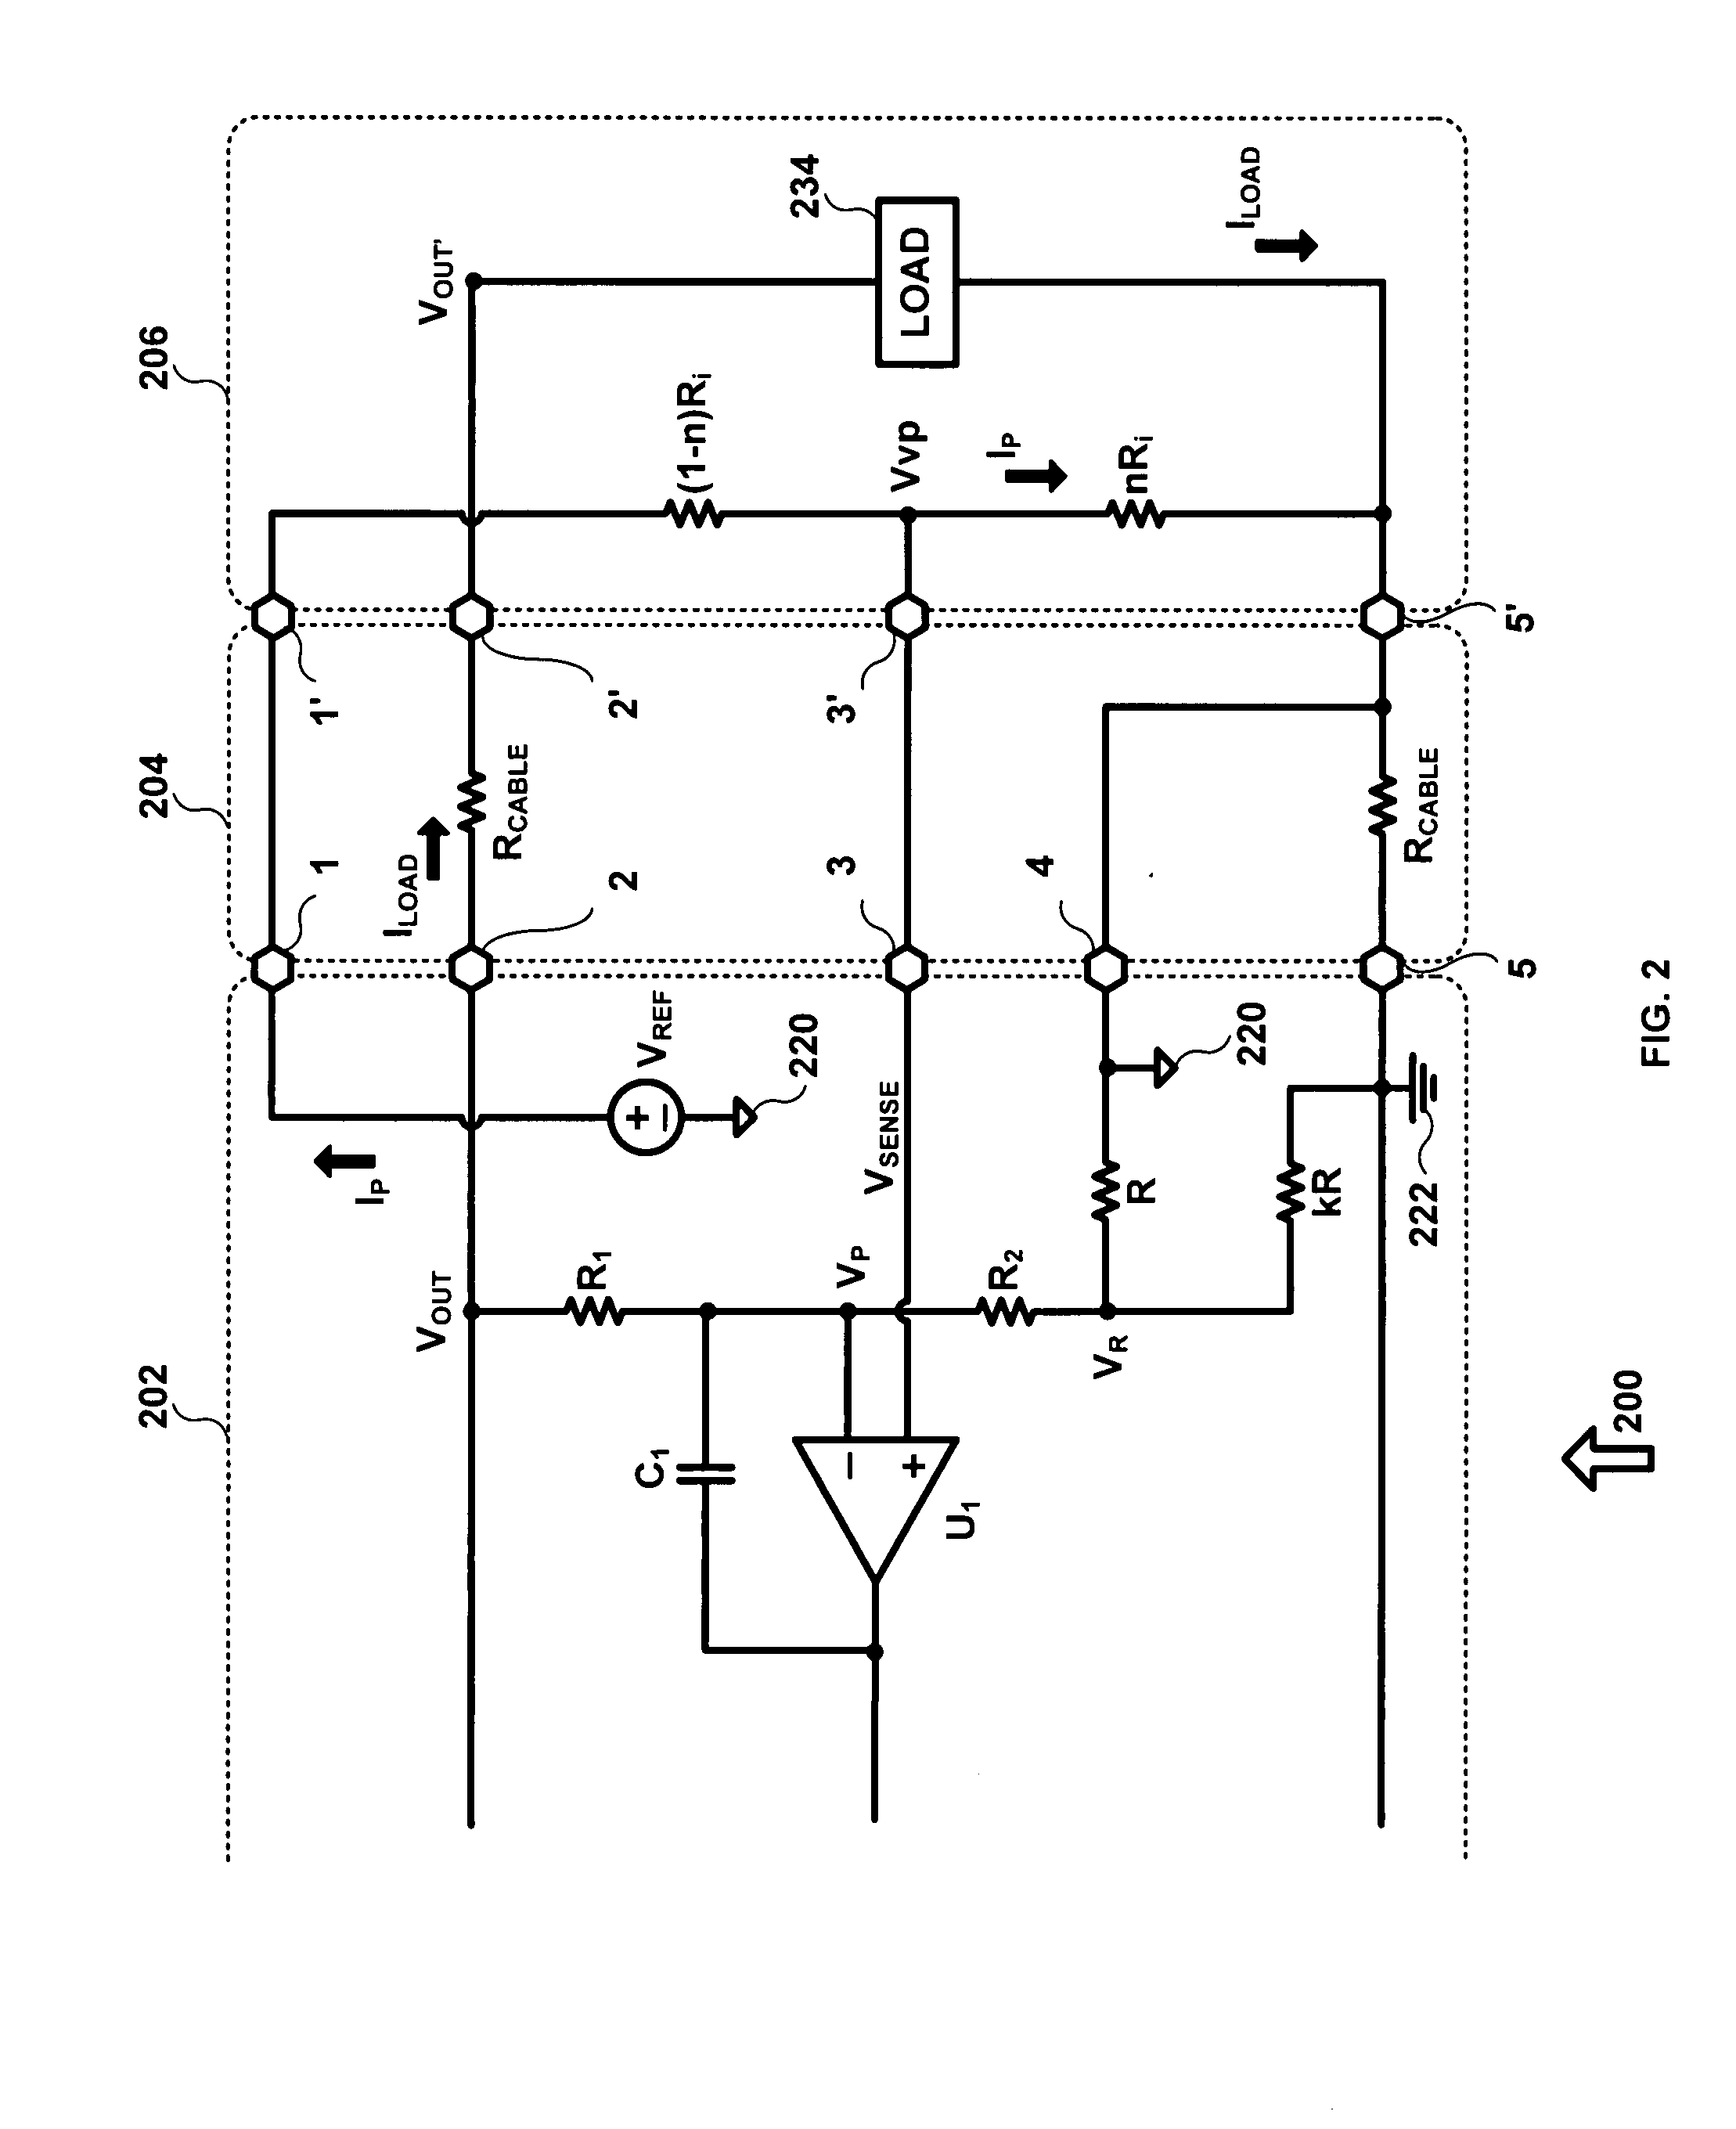 System and method for cable resistance cancellation